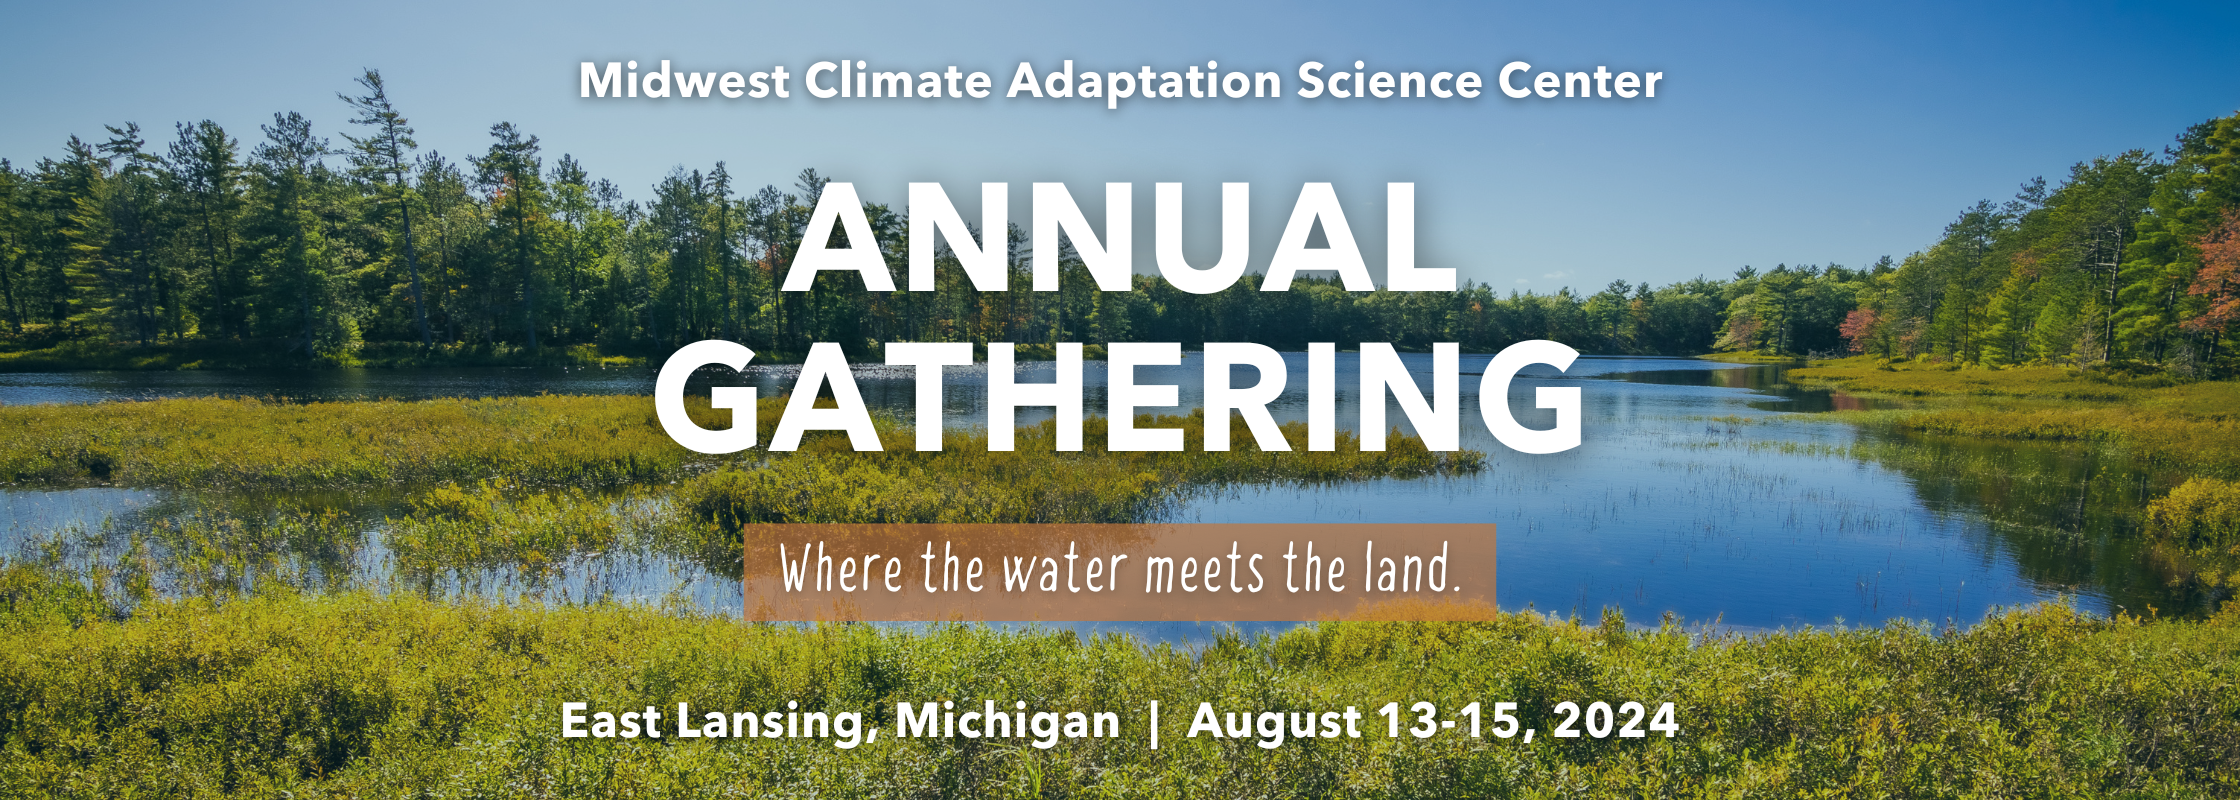 Annual Gathering: Where the water meets the land.